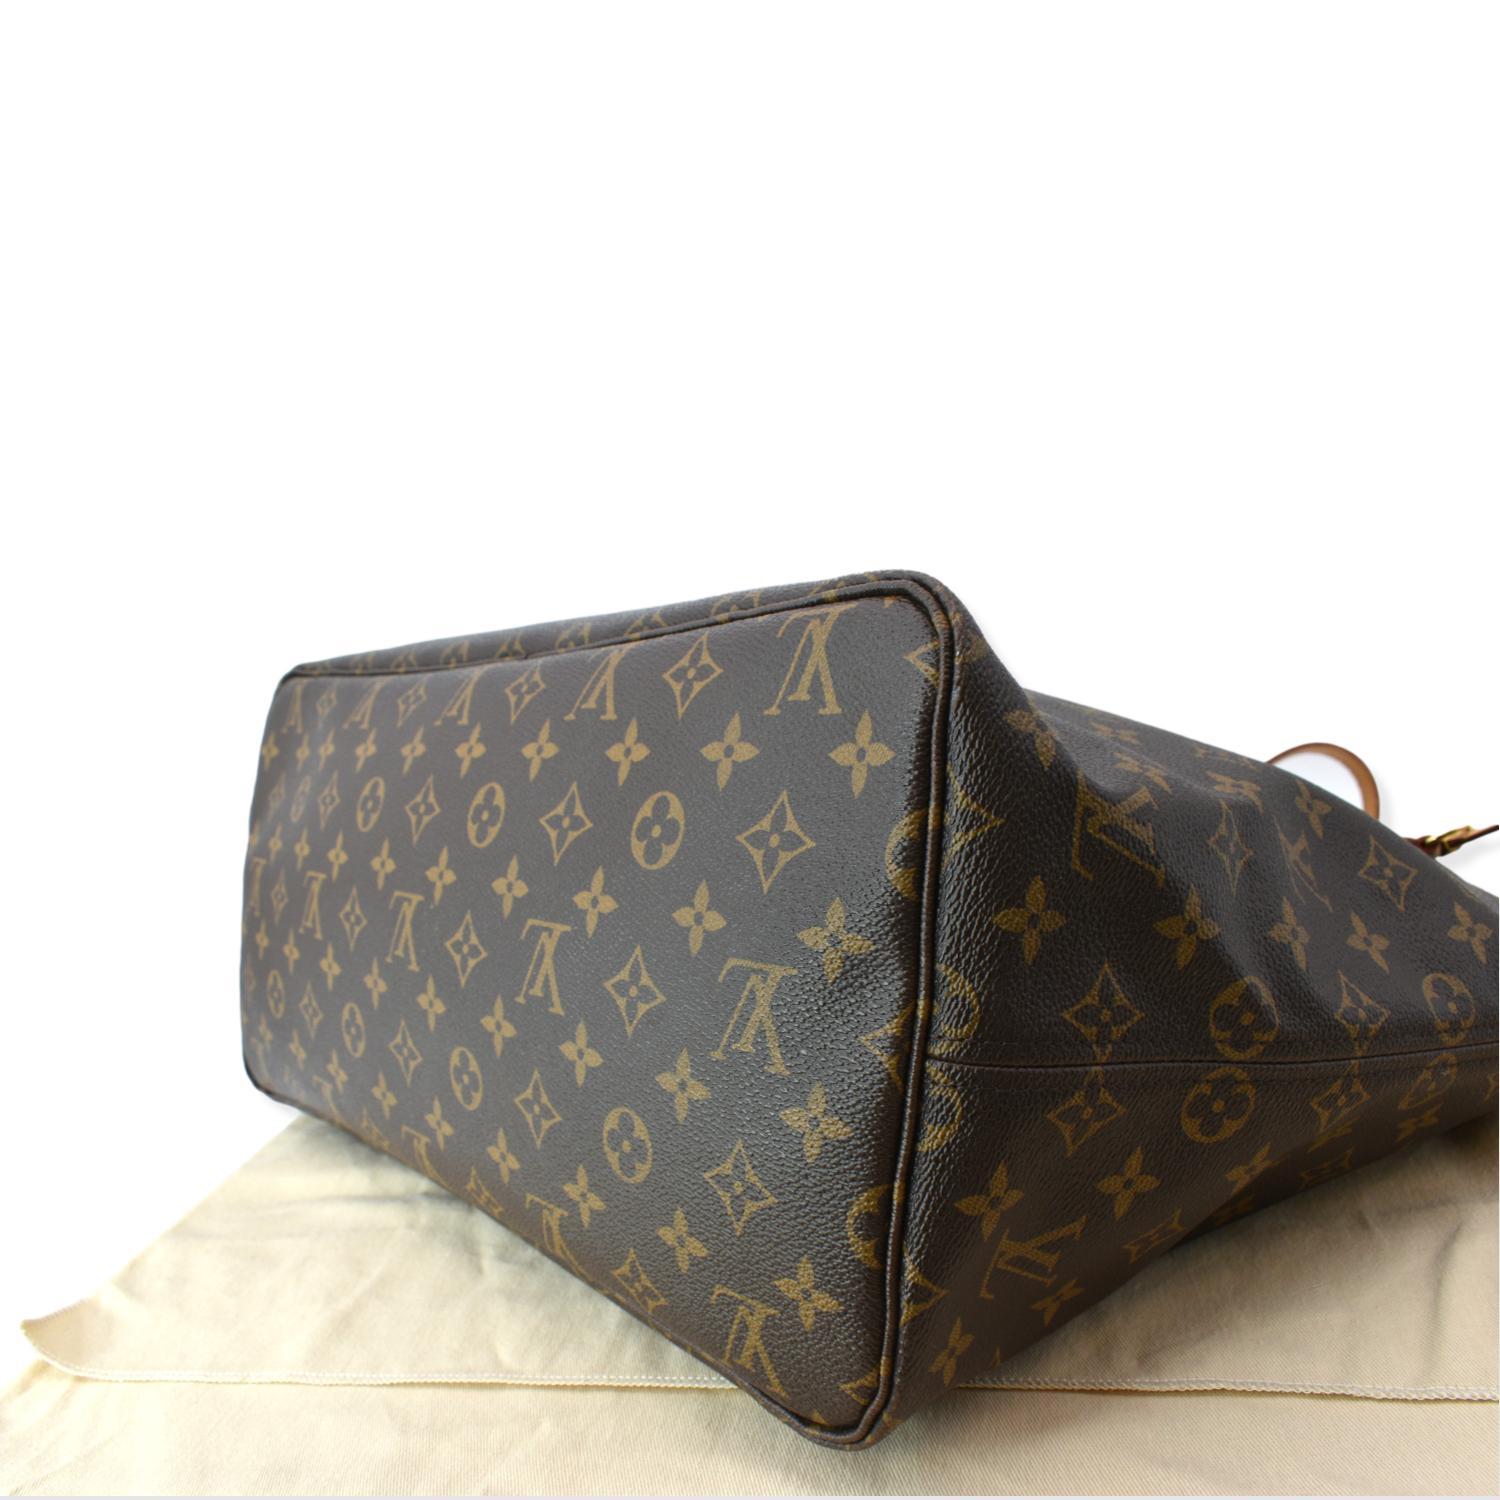 Available $ 1699 Free standard shipping USA Authentic Neverfull GM